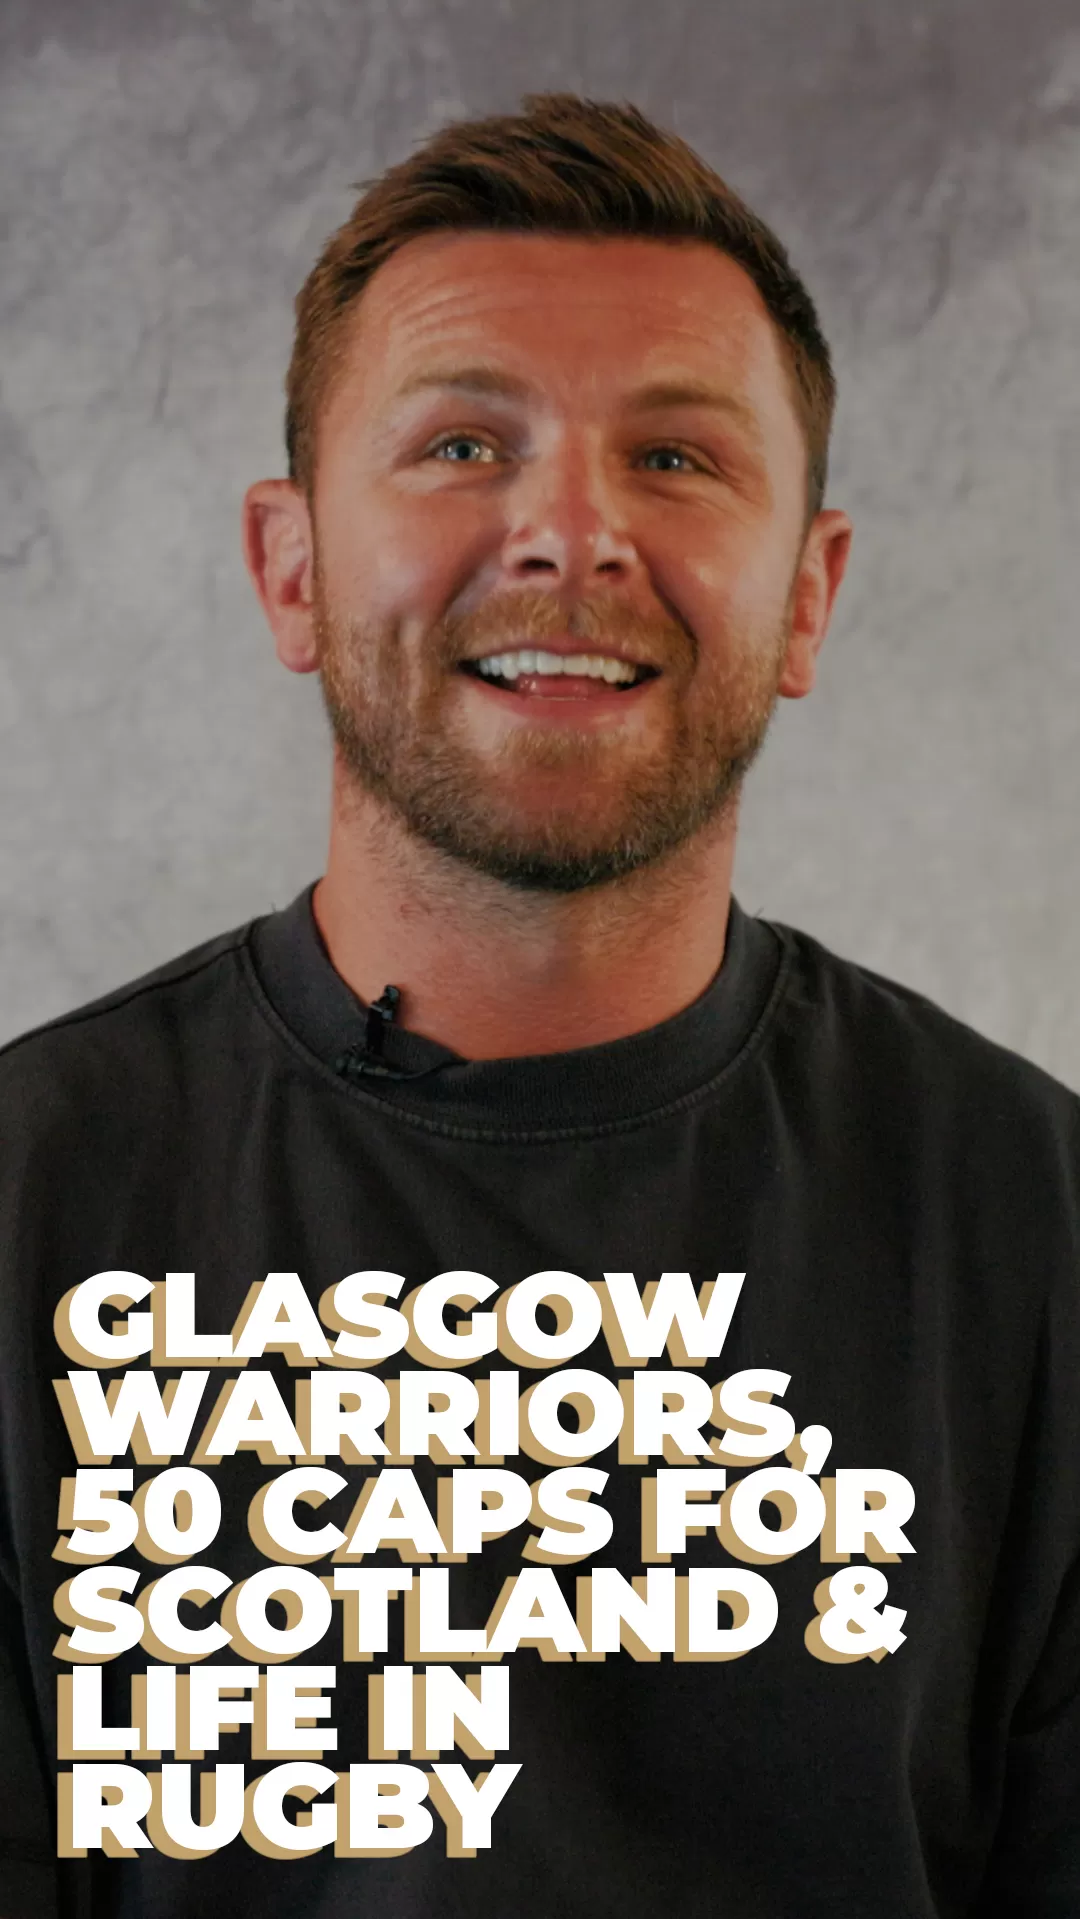 GLASGOW WARRIORS, 50 CAPS FOR SCOTLAND & LIFE IN RUGBY - RYAN WILSON